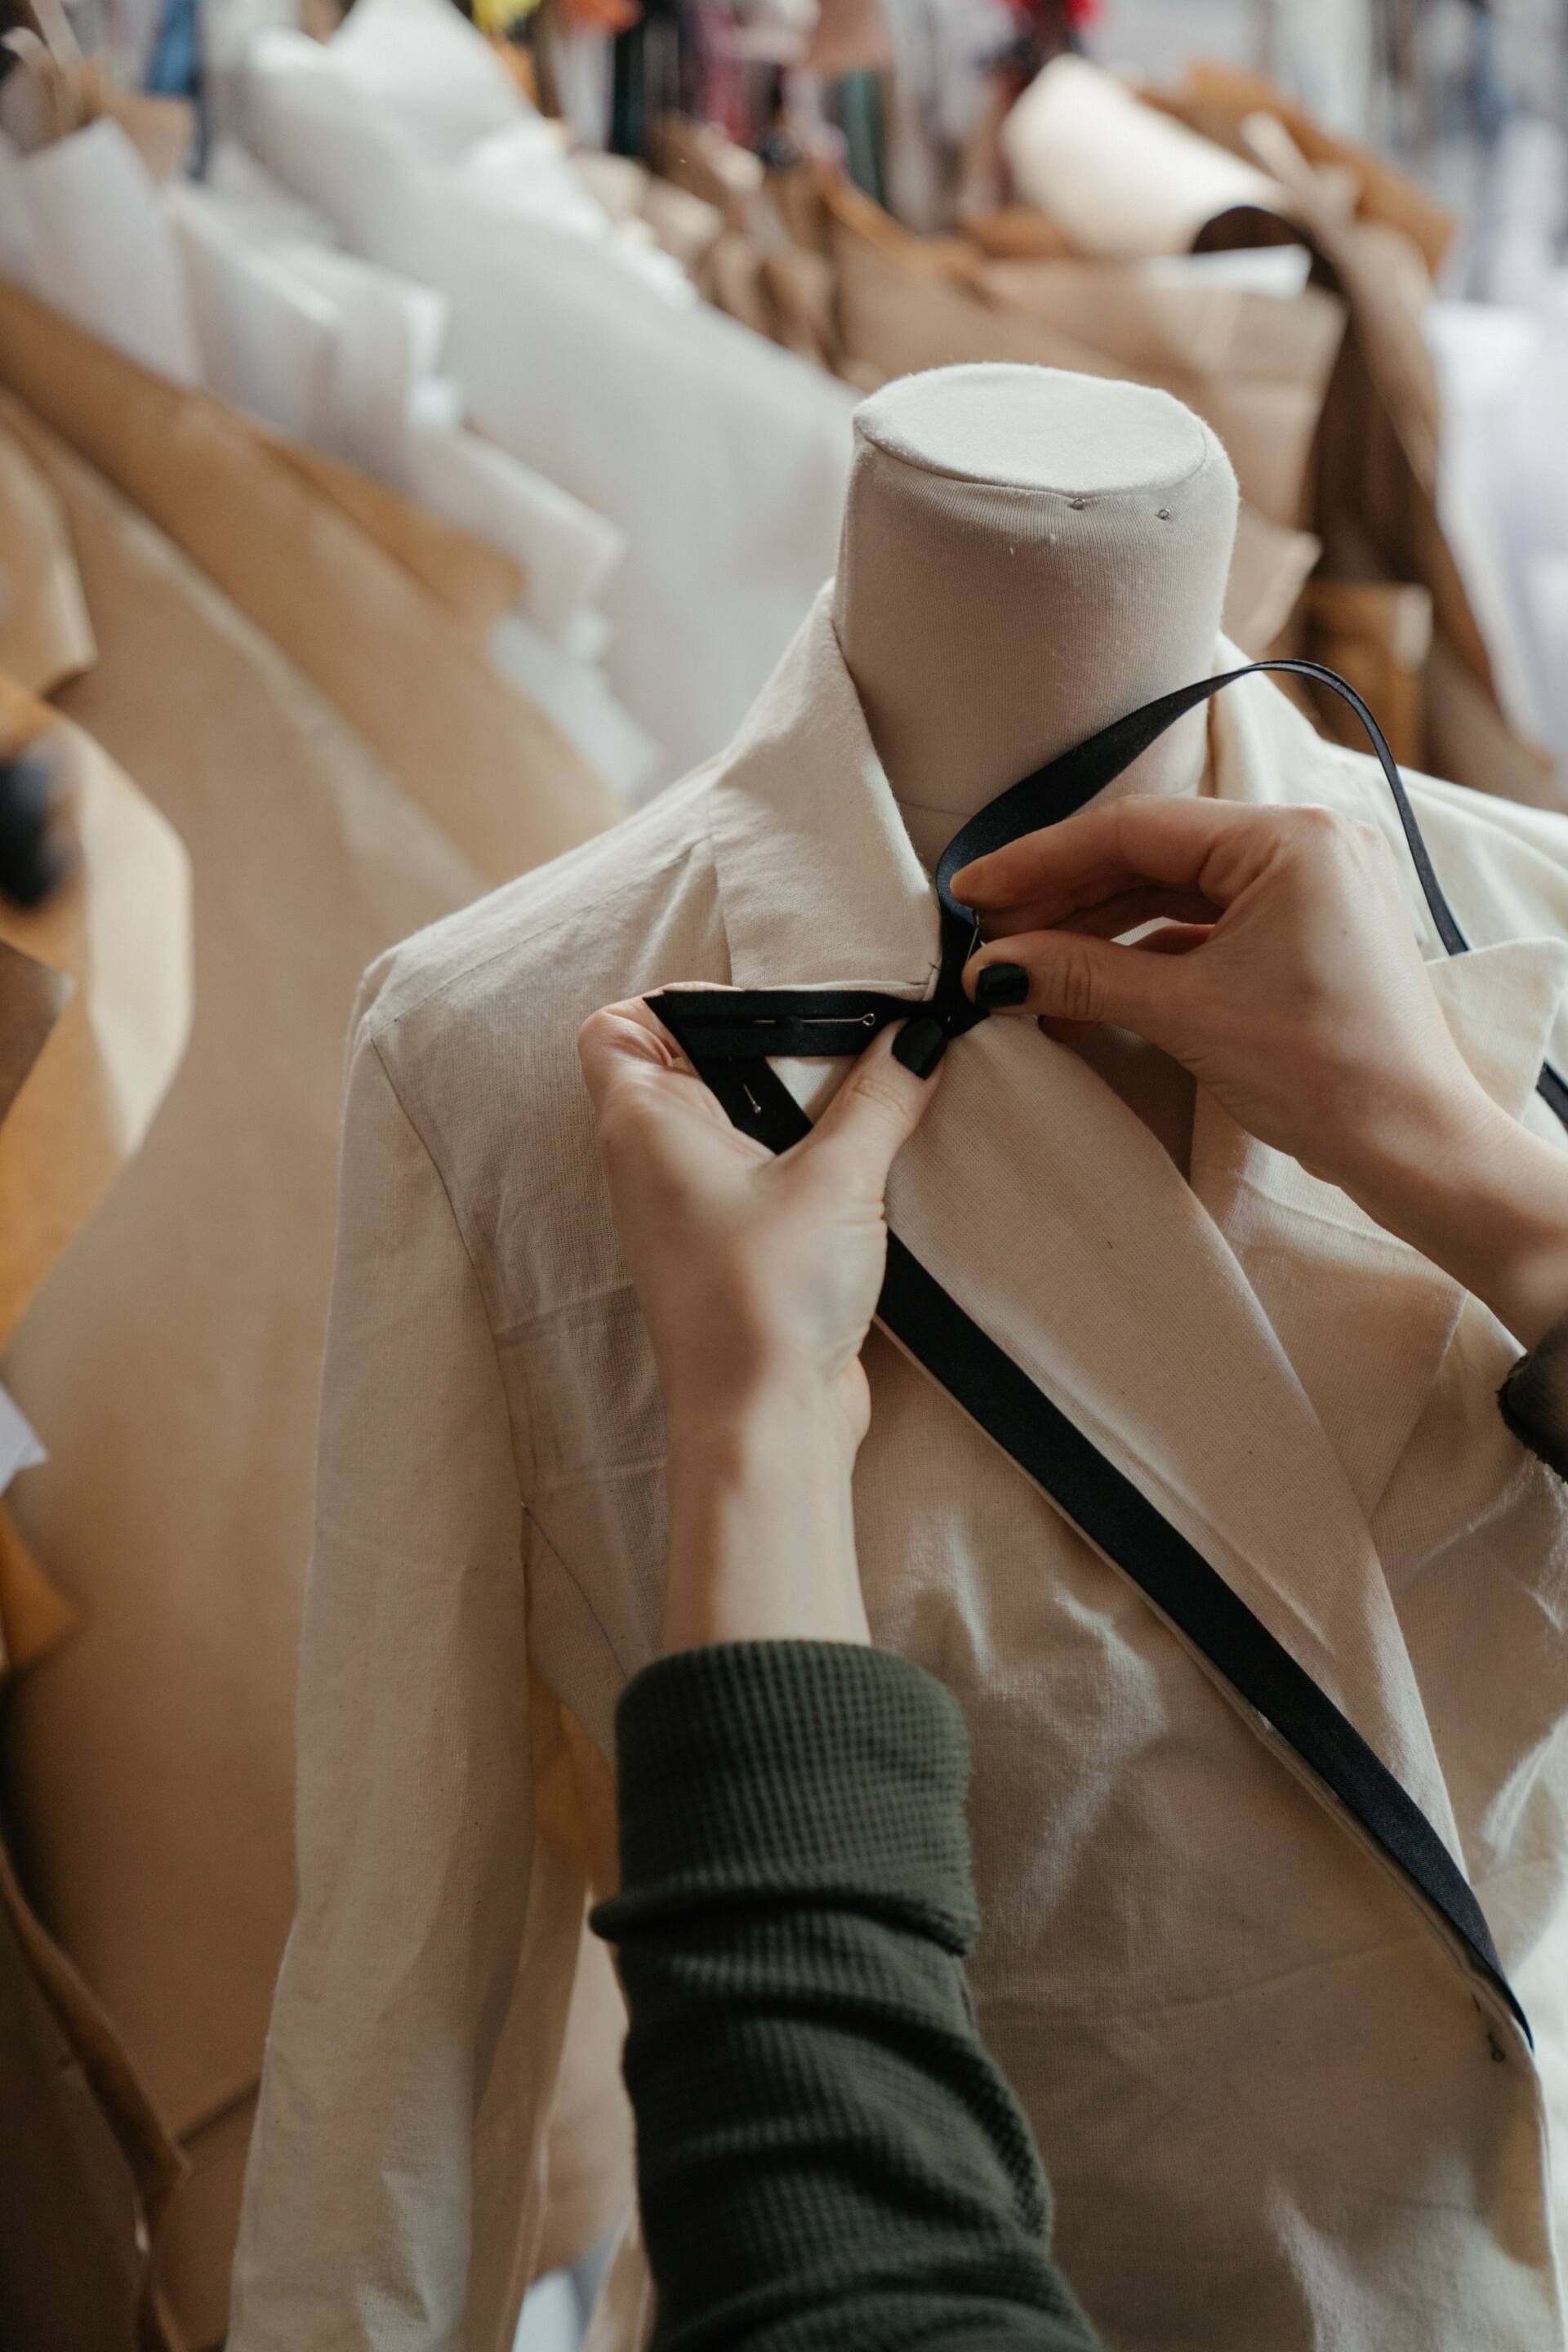 Why you should buy artisanal made clothing - Evelyn Storms